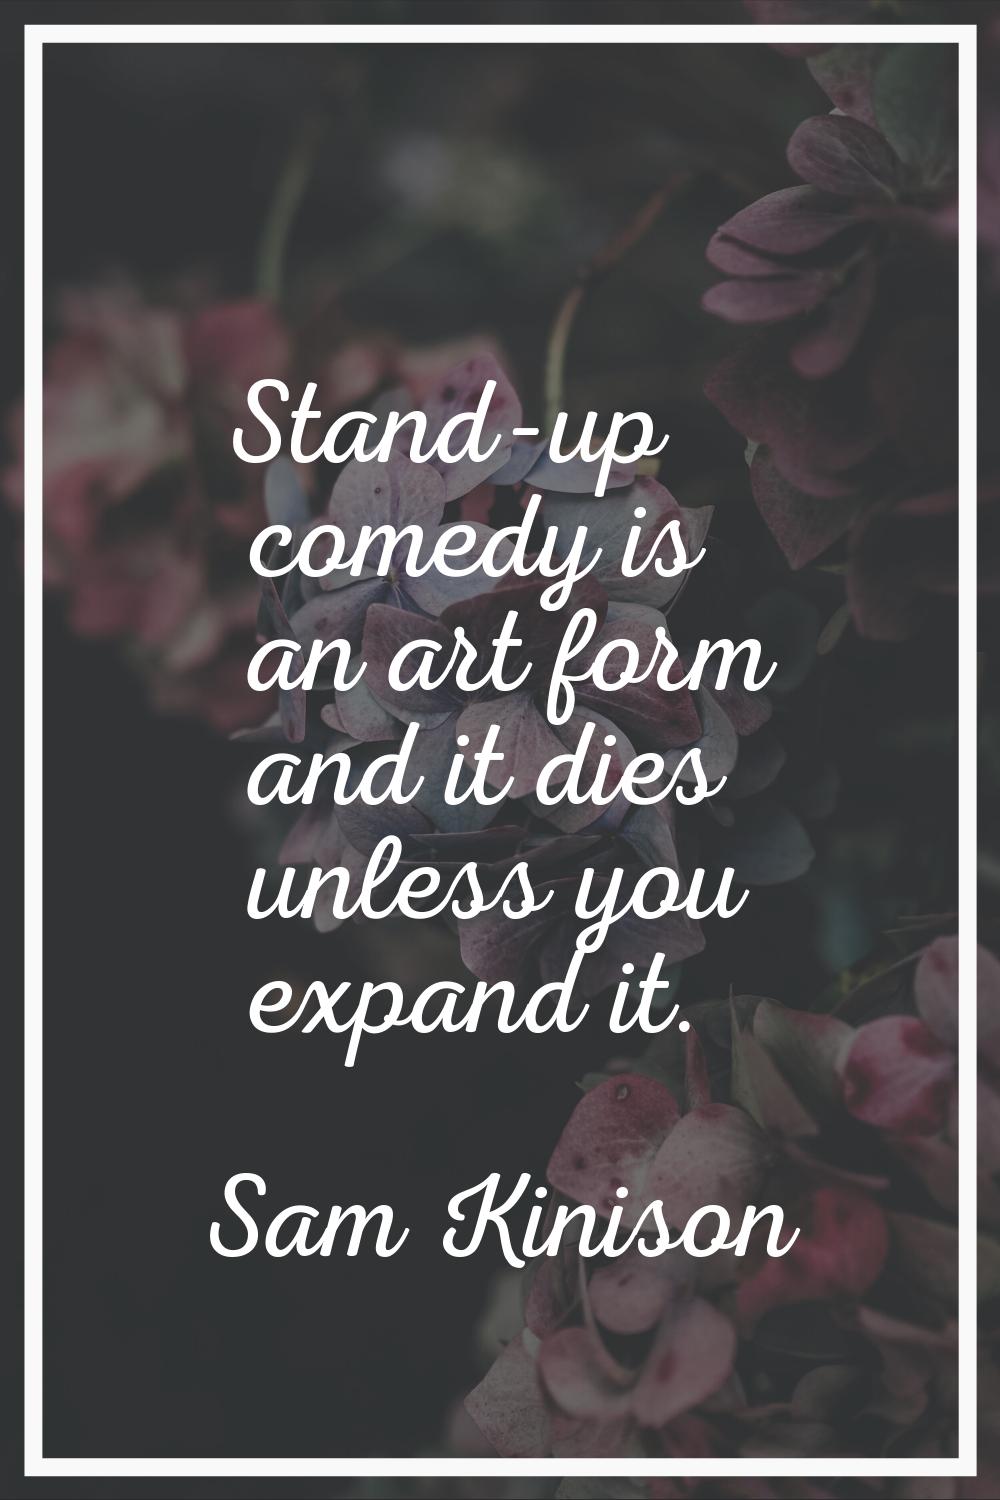 Stand-up comedy is an art form and it dies unless you expand it.